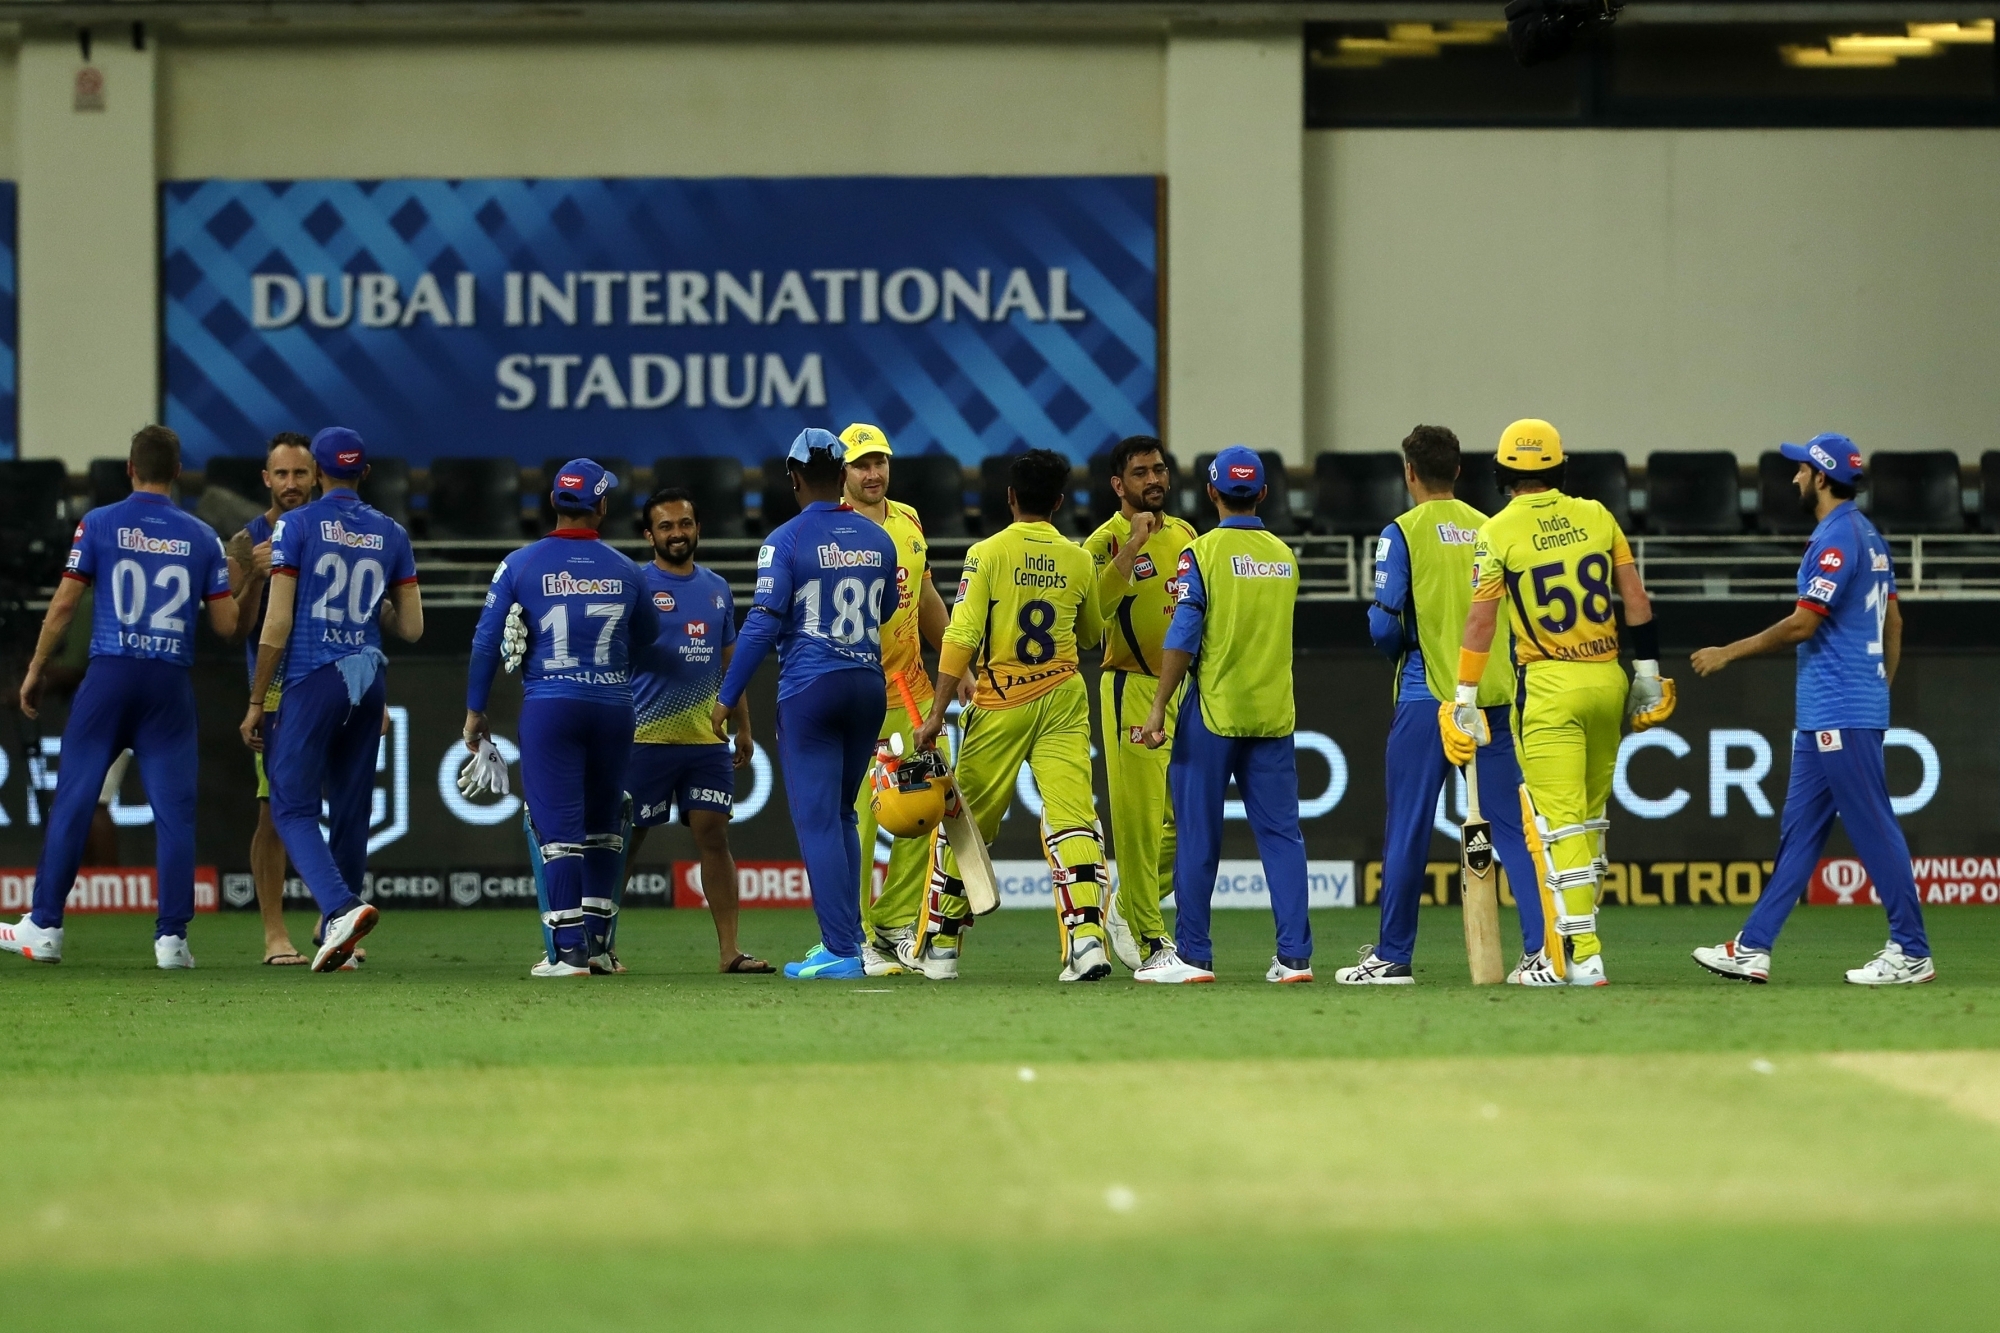 DC outplayed CSK in all departments | IANS